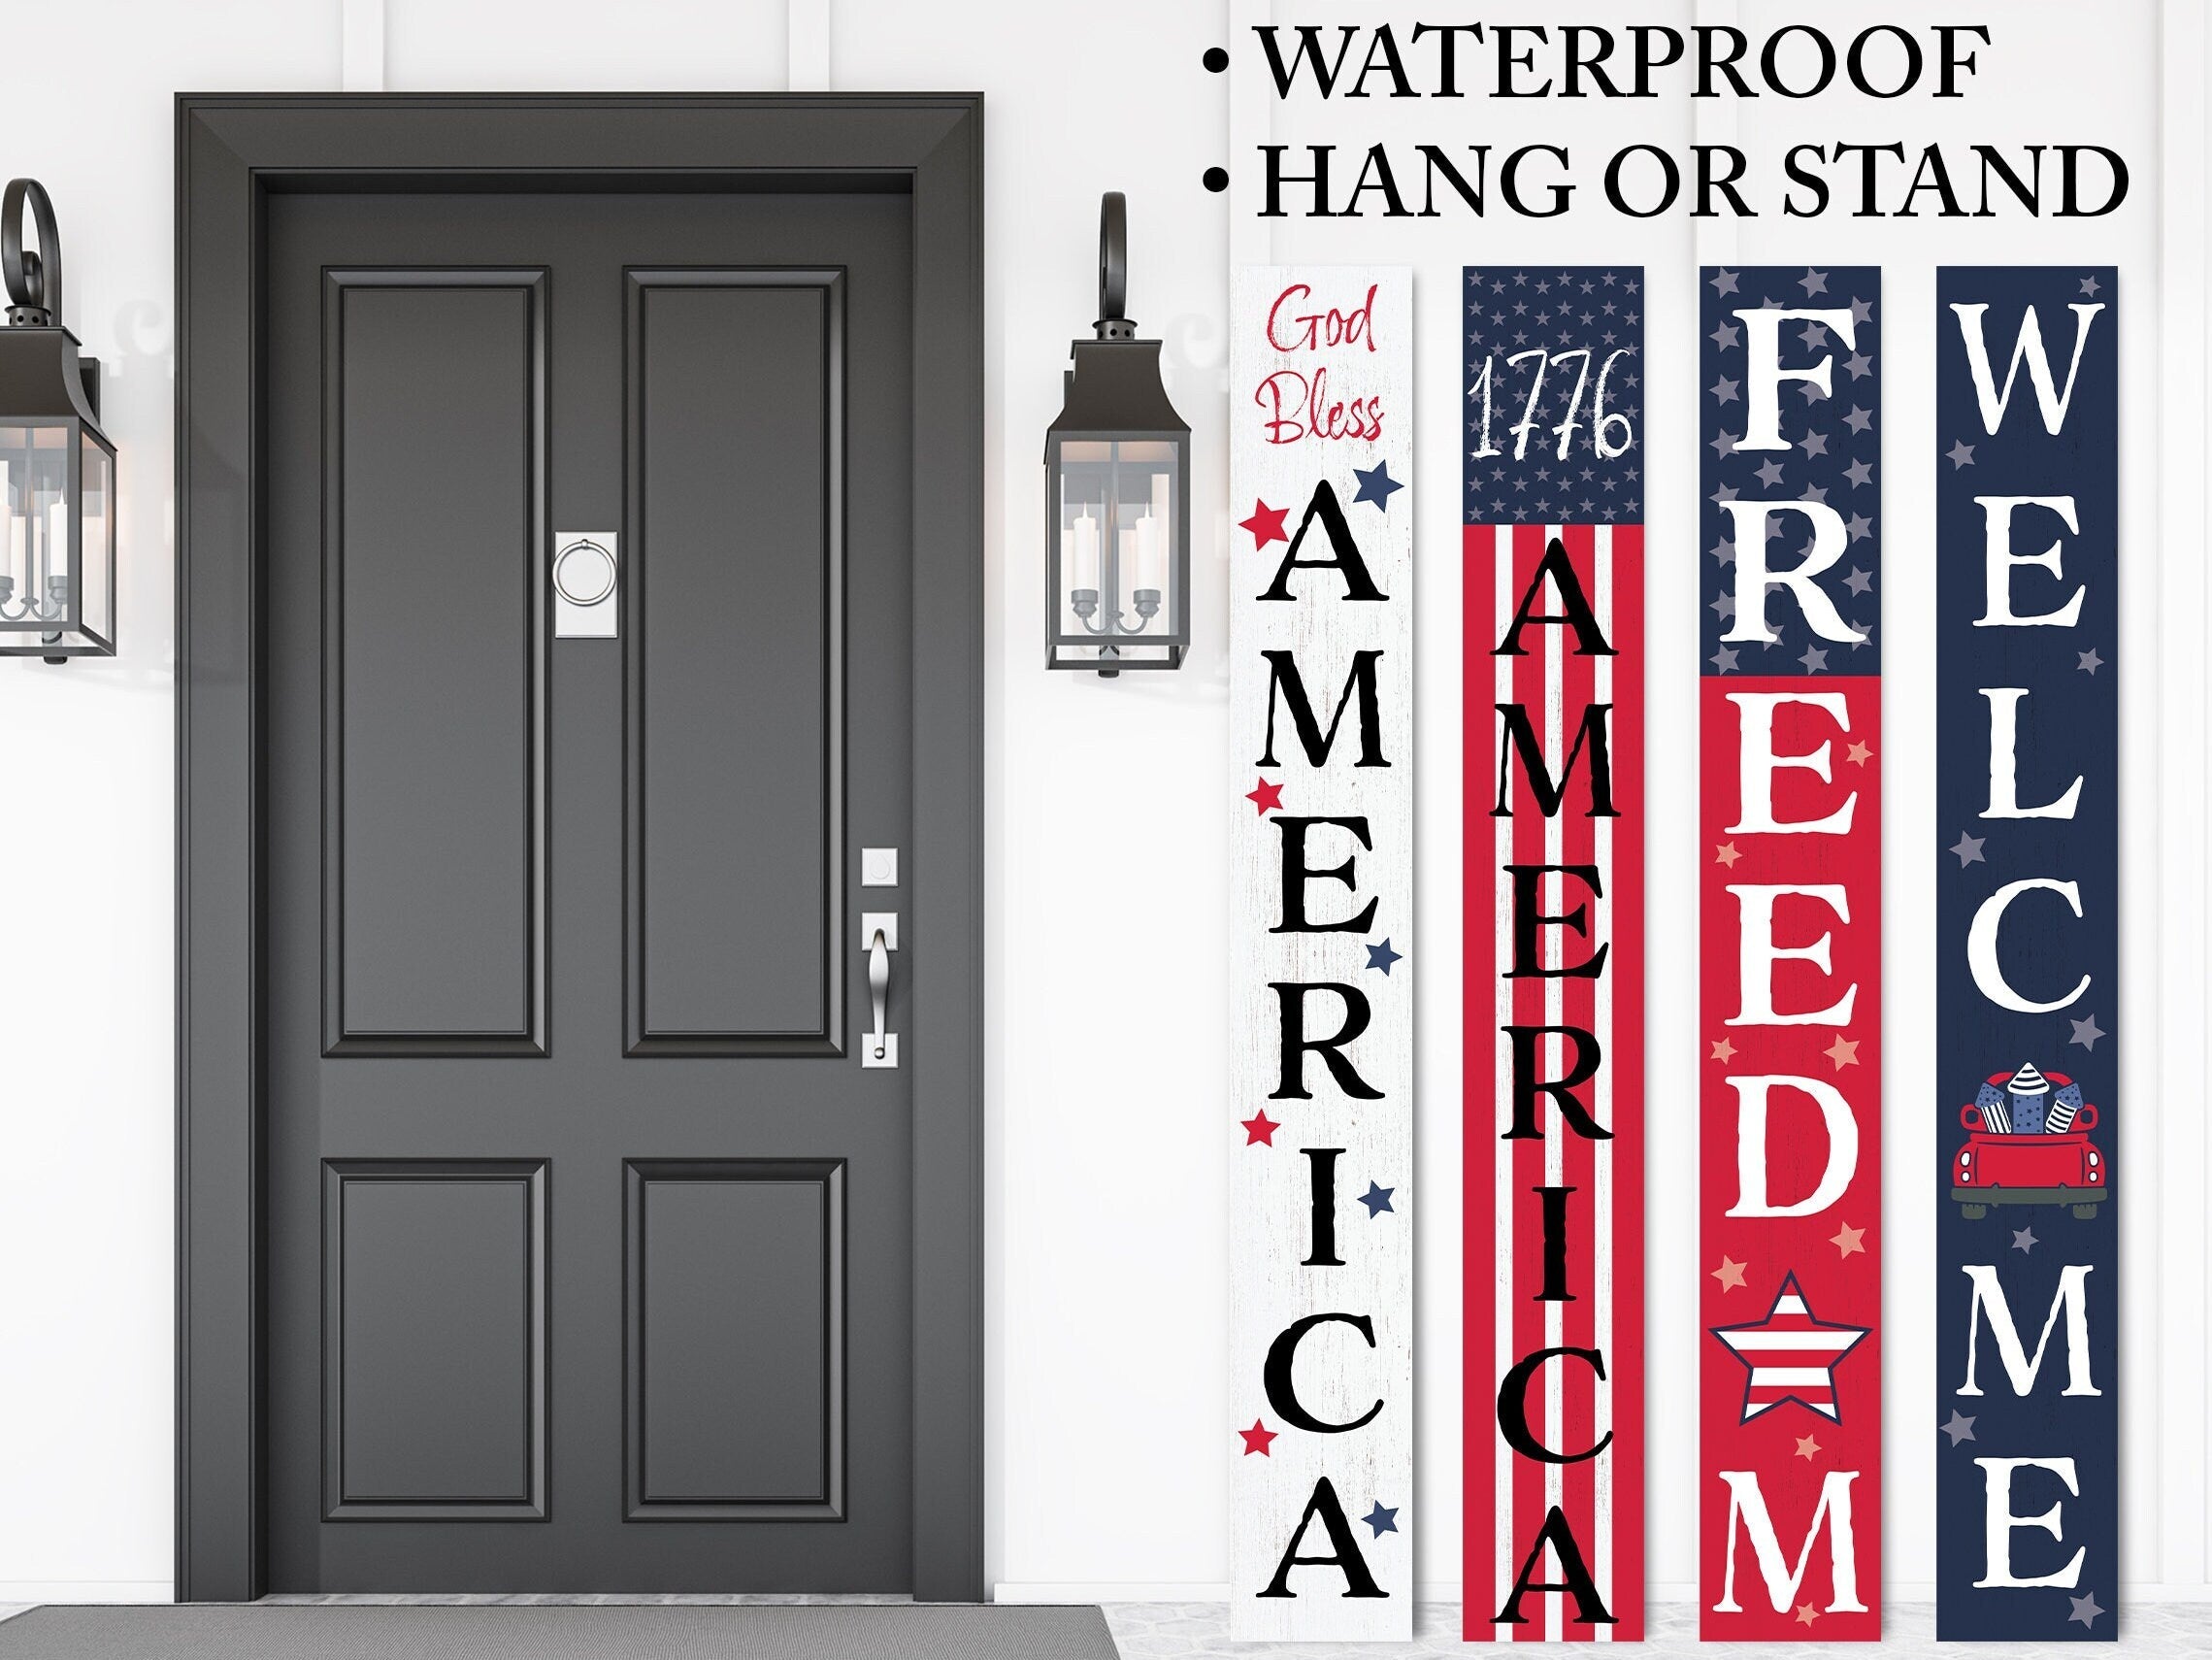 72in-4th-of-July-God-Bless-America-Porch-Sign-|-Patriotic-Wooden-Porch-Decor-|-Farmhouse-Decor-for-Porch-|-Independence-Day-Outdoor-Decor-